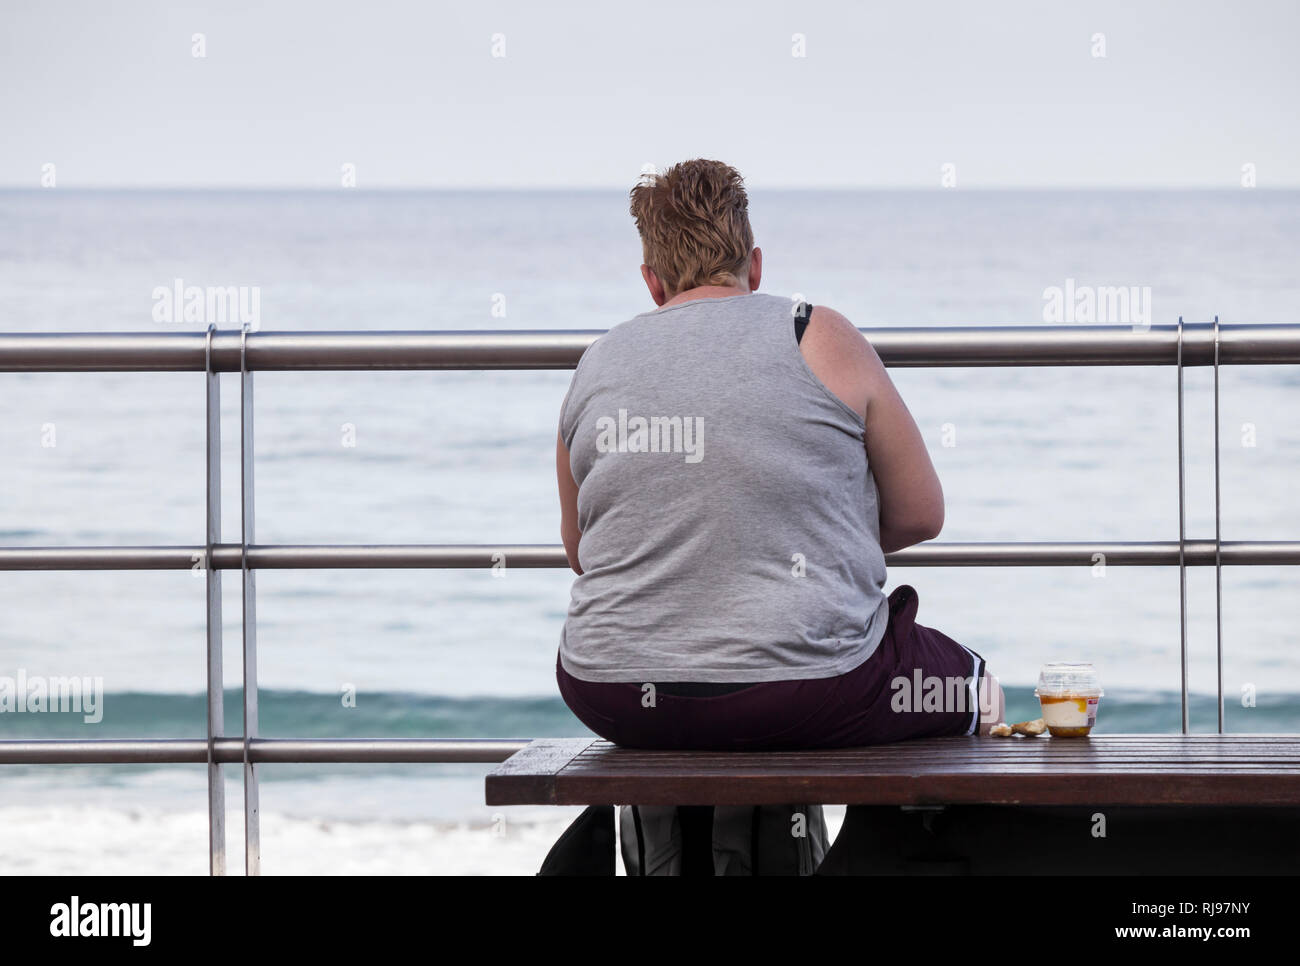 Rear view of obese woman with sugary snack sitting on bench overlooking sea. Stock Photo